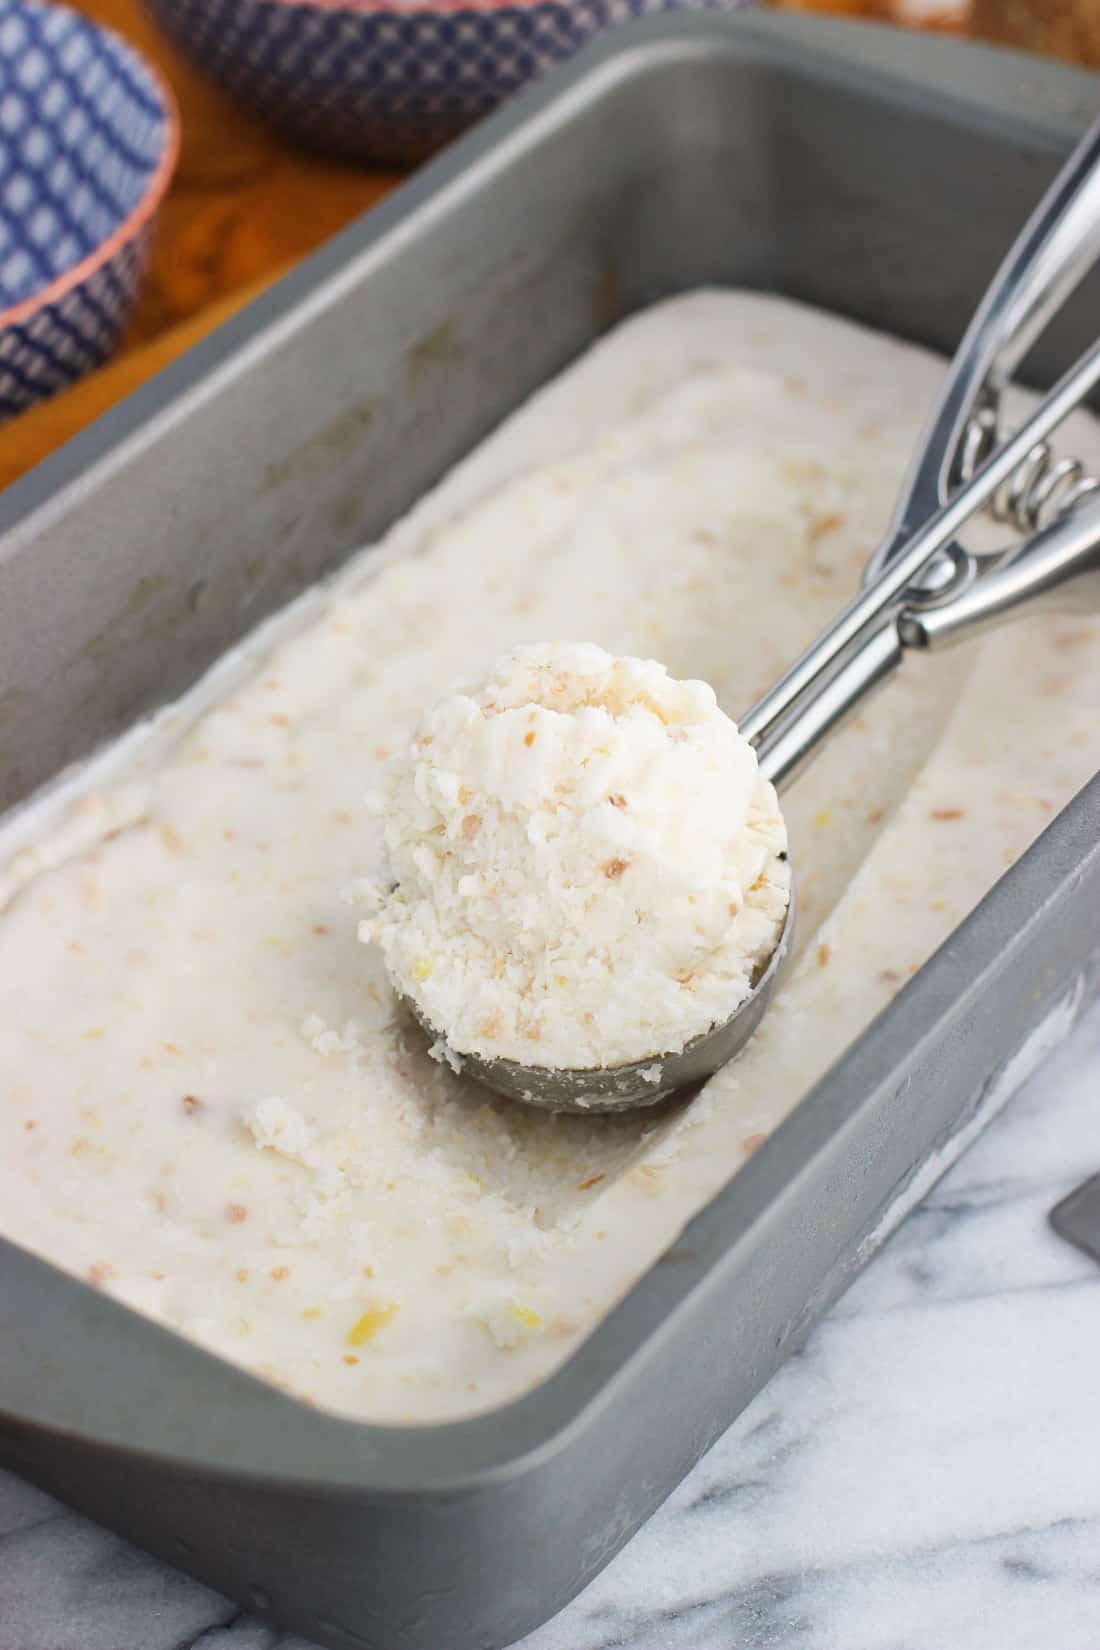 A metal scoop filled with ice cream resting on top of the container.